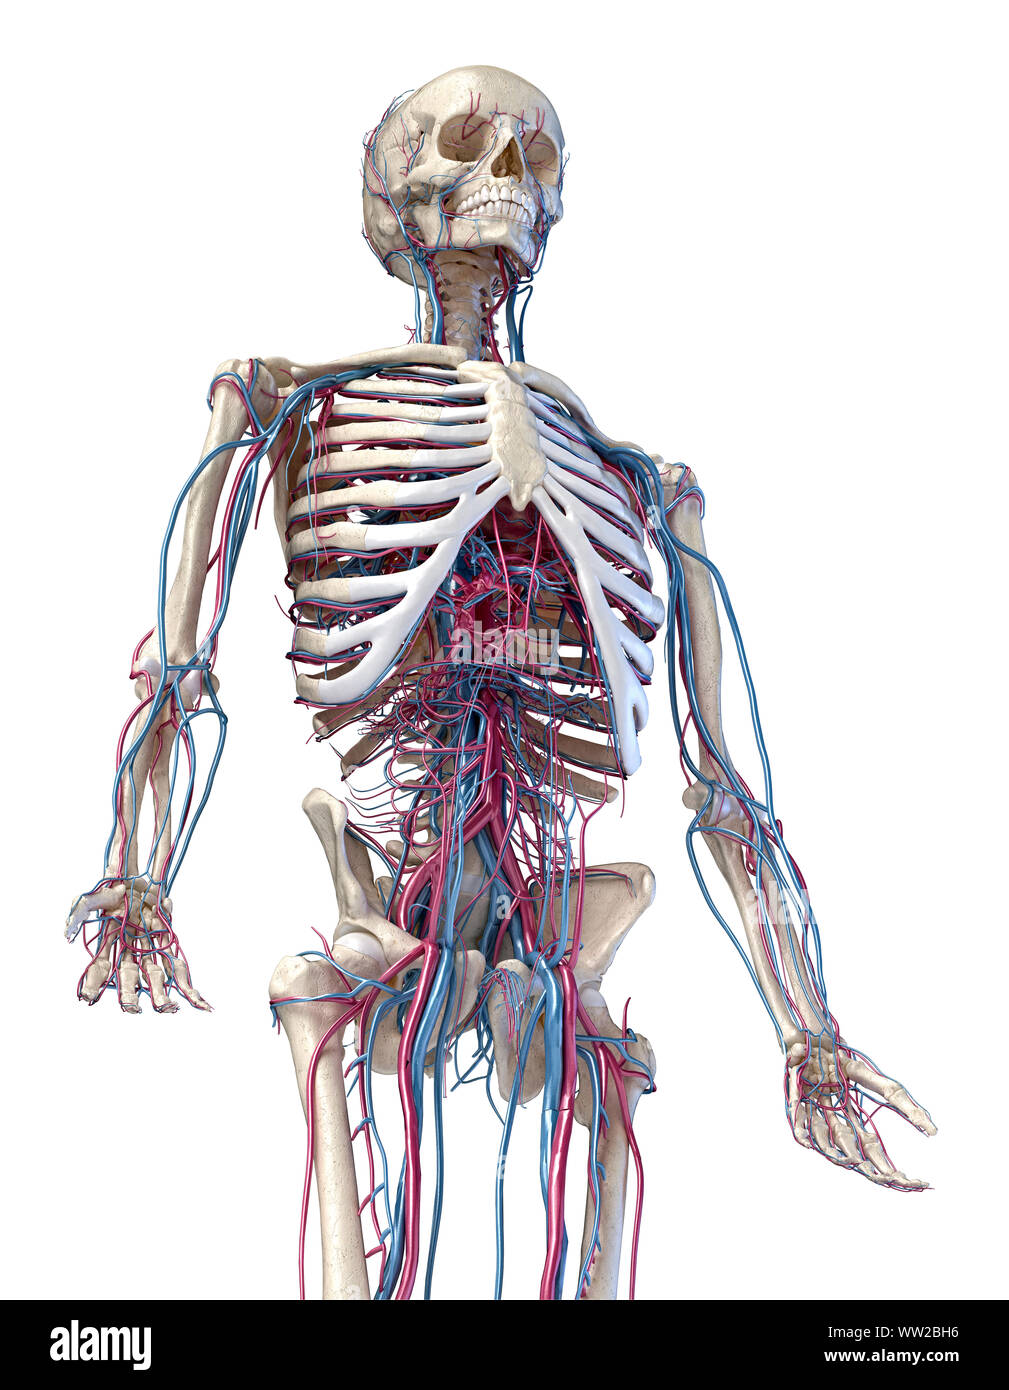 Human anatomy, 3d illustration of the skeleton with cardiovascular system. Perspective view of 3/4 upper part, front side. On white background. Stock Photo